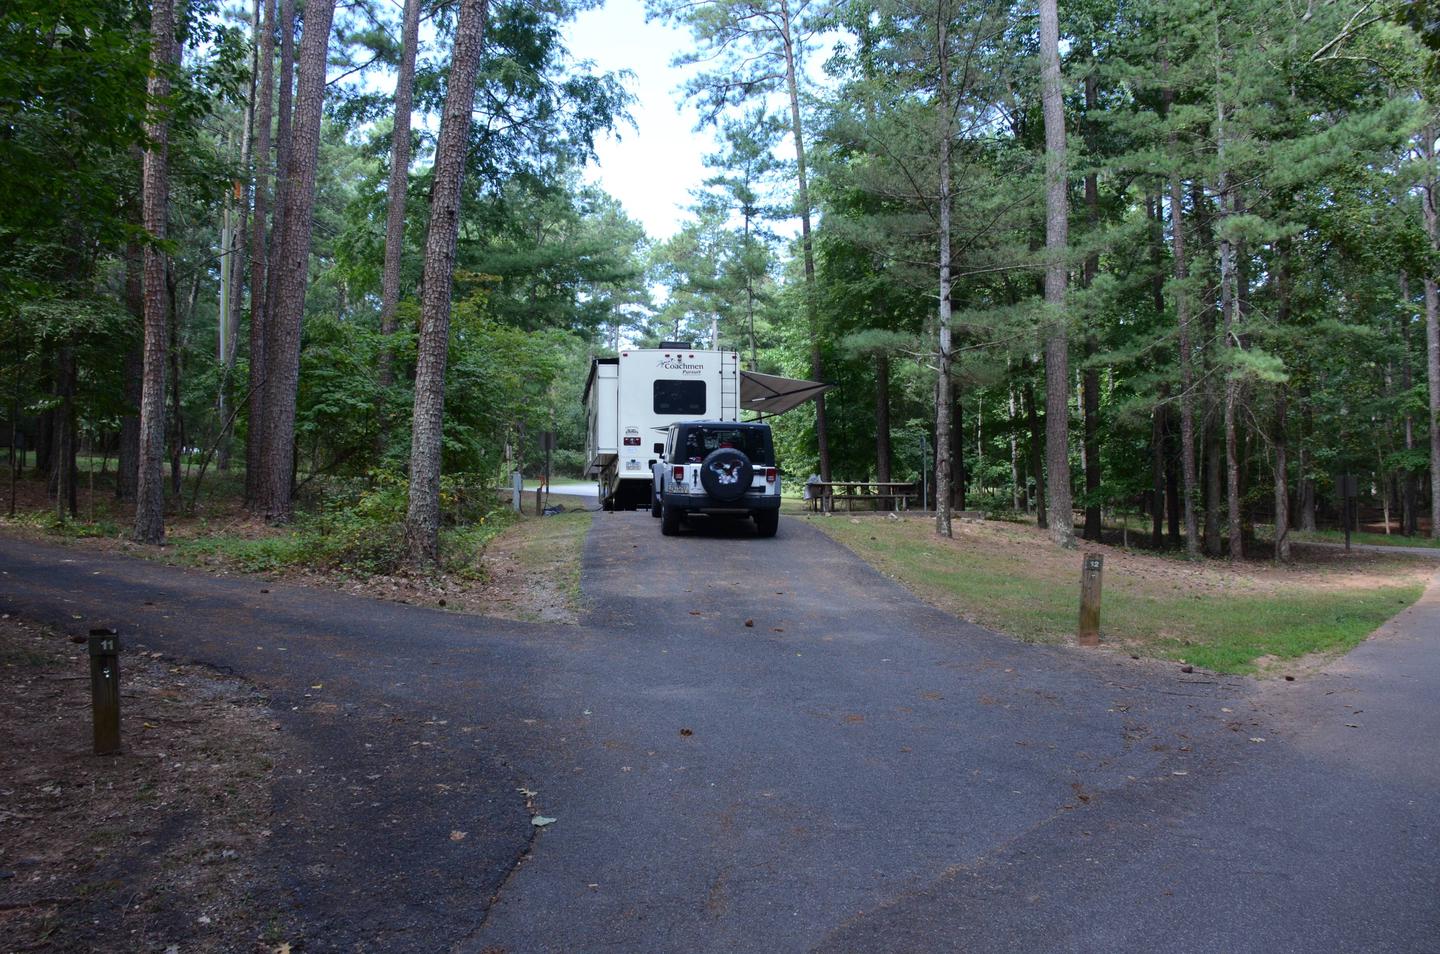 Pull-thru entrance, utilities clearance.McKinney Campground, campsite 12.